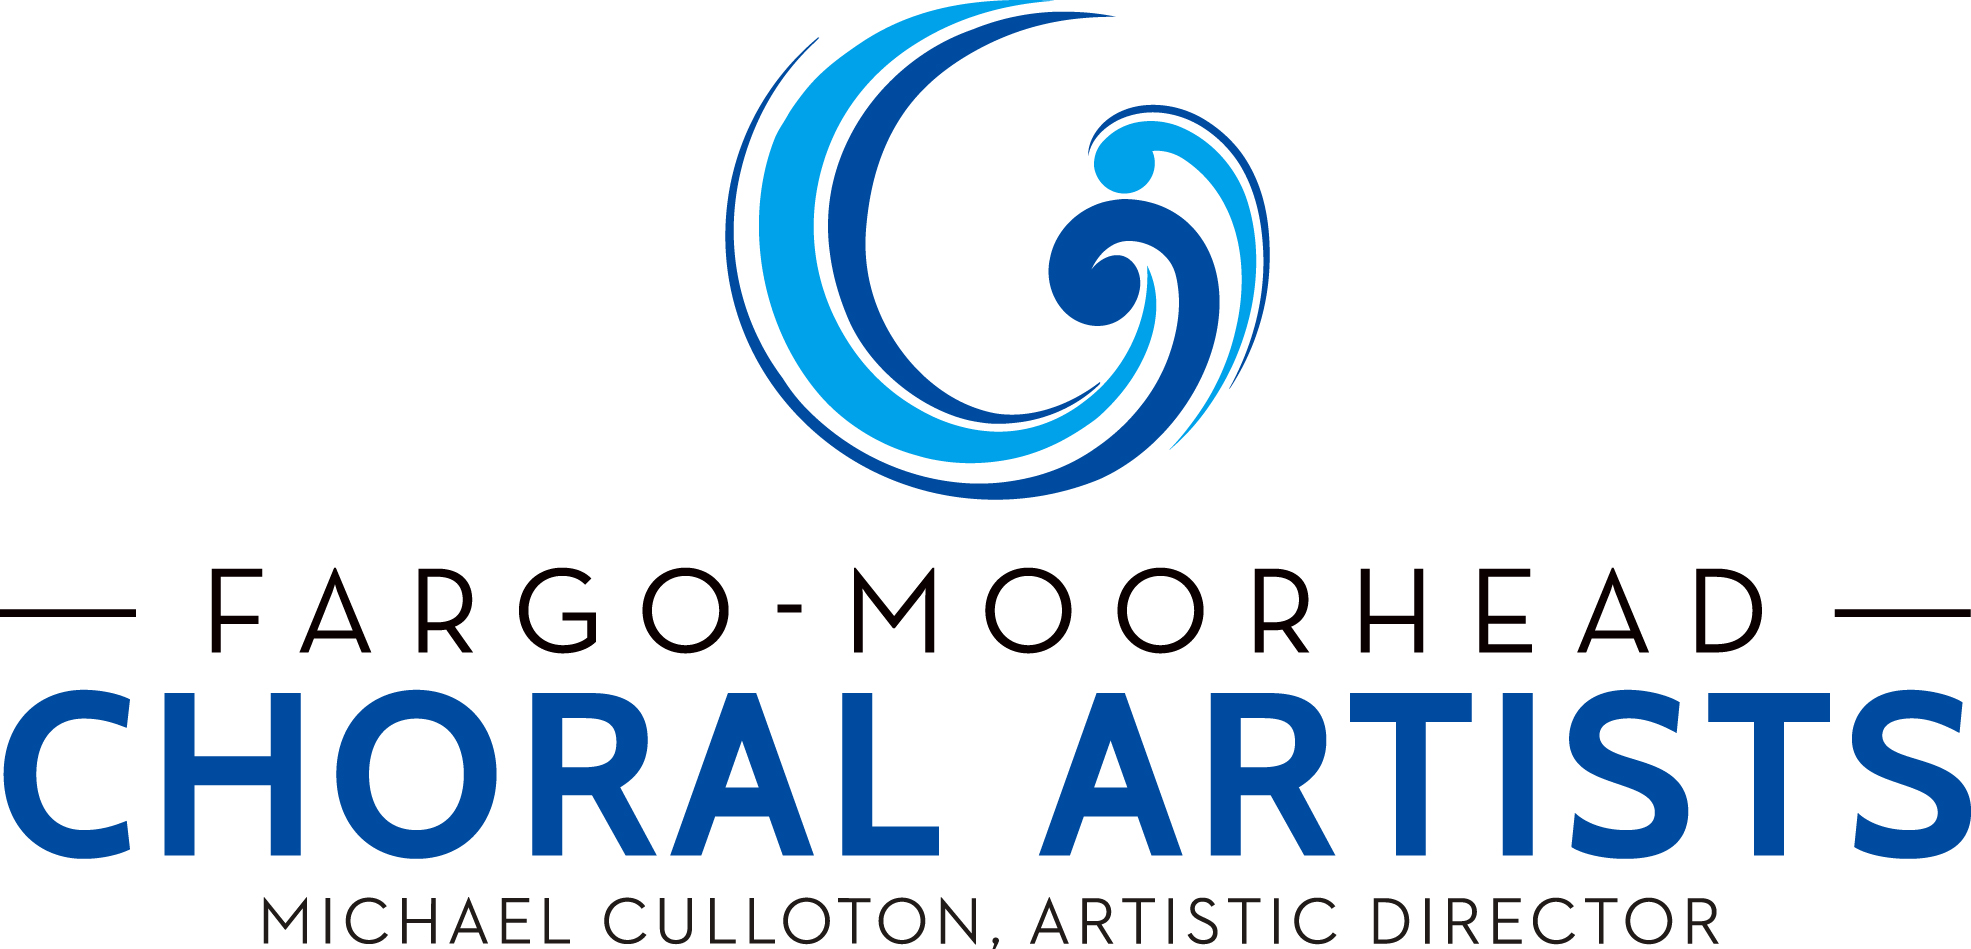 This image shows the logo for the Fargo-Moorhead Choral Artists.